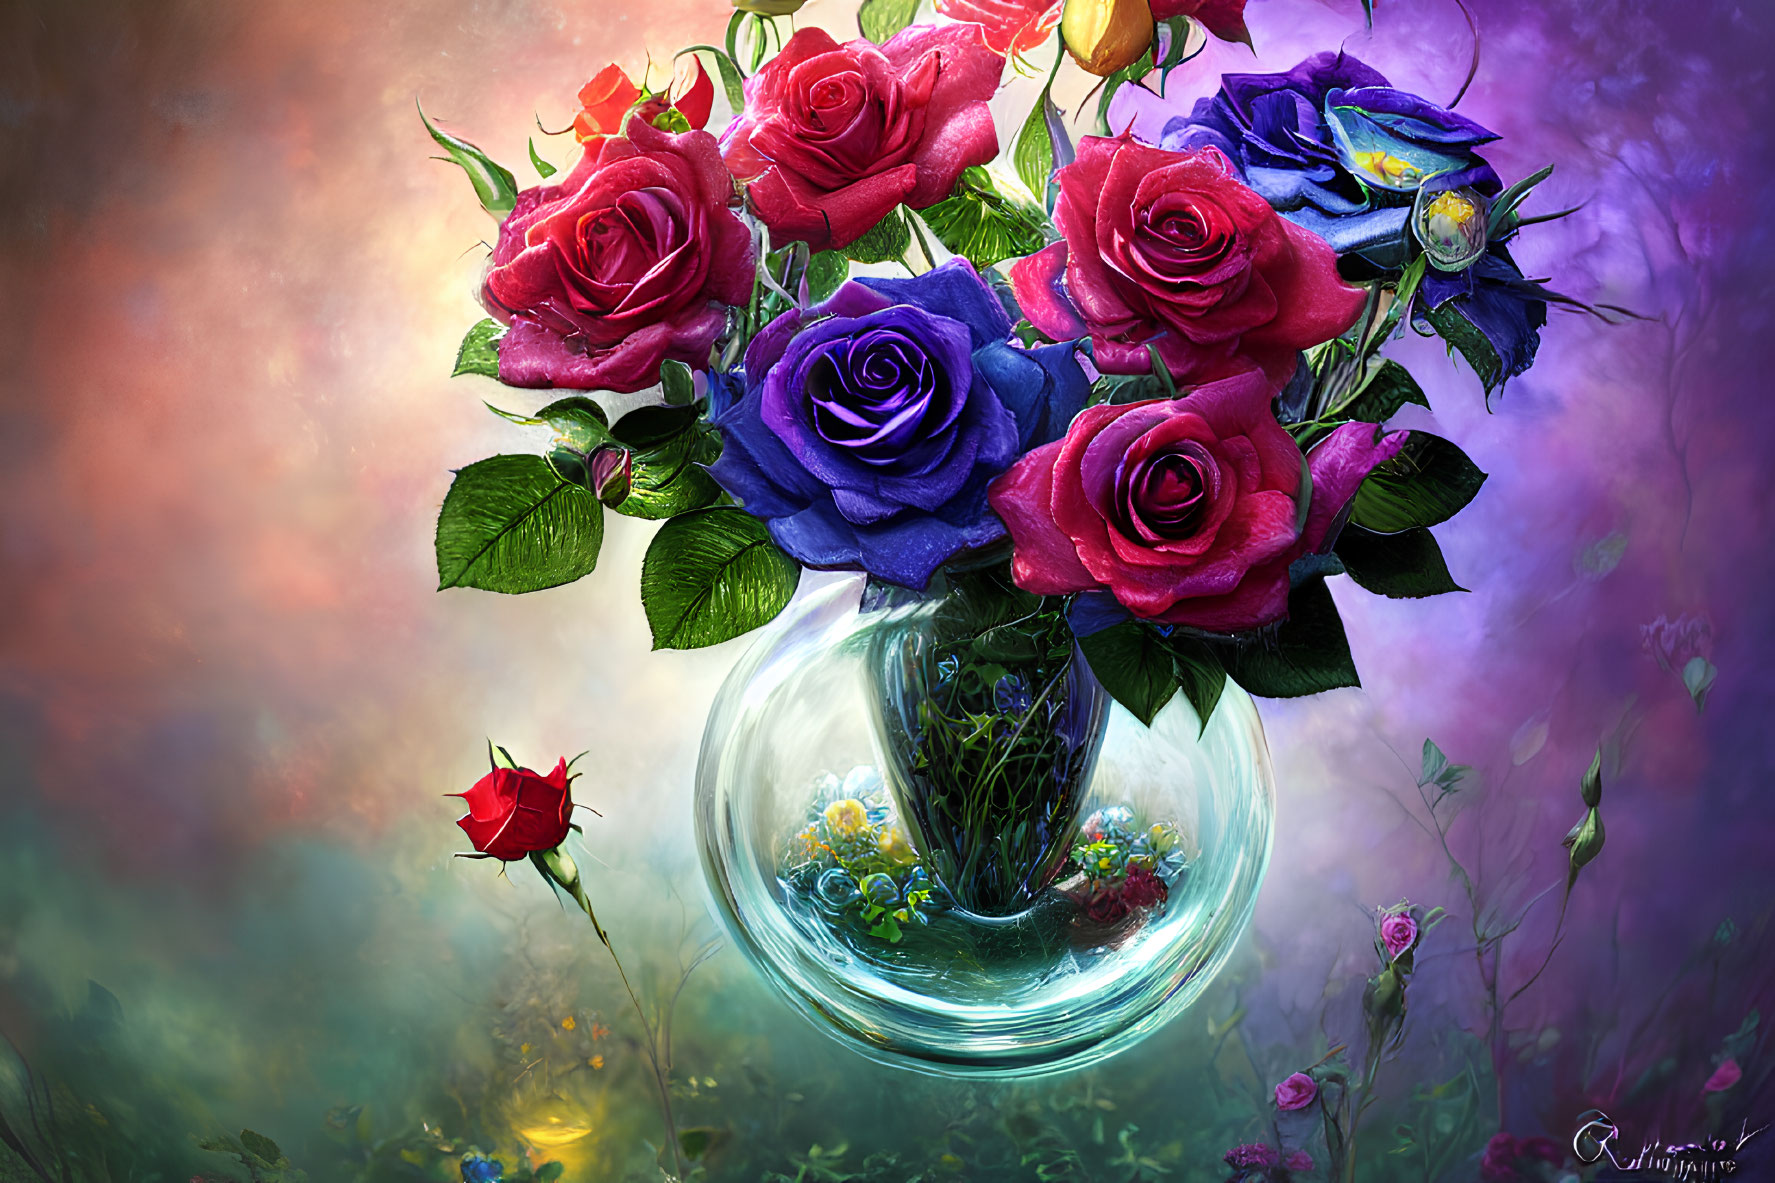 Colorful Rose Bouquet in Transparent Vase on Mystical Background